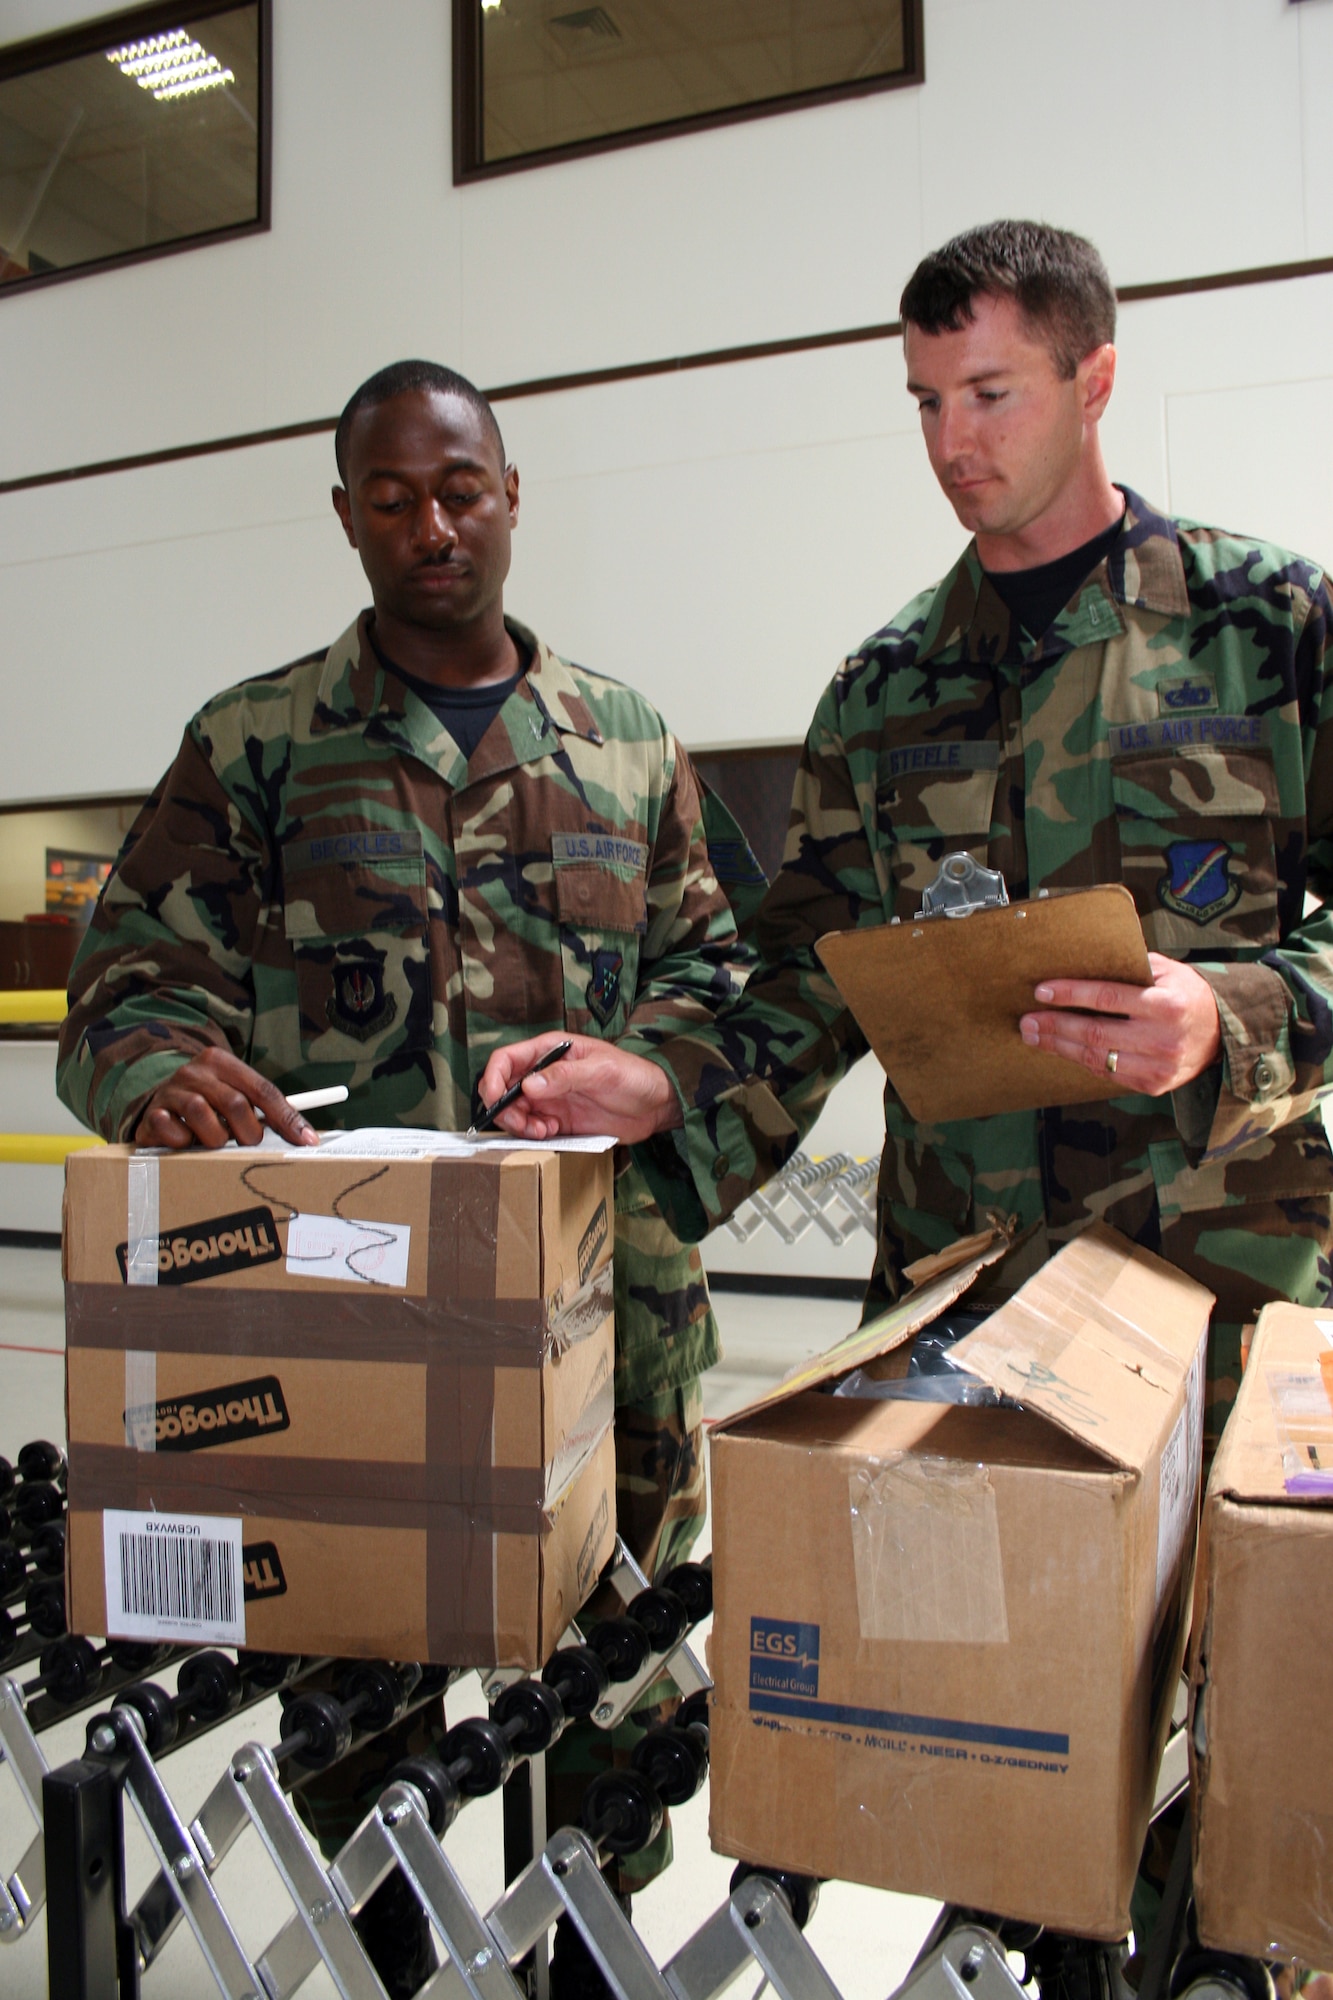 Staff Sgt. Raja Beckles (left) and Tech. Sgt. Chad Steele inventory items at the 39th Logistics Readiness Squadron at Incirlik Air Base, Turkey, on Wednesday, June 21. (U.S. Air Force photo/Staff Sgt. Oshawn Jefferson) 

